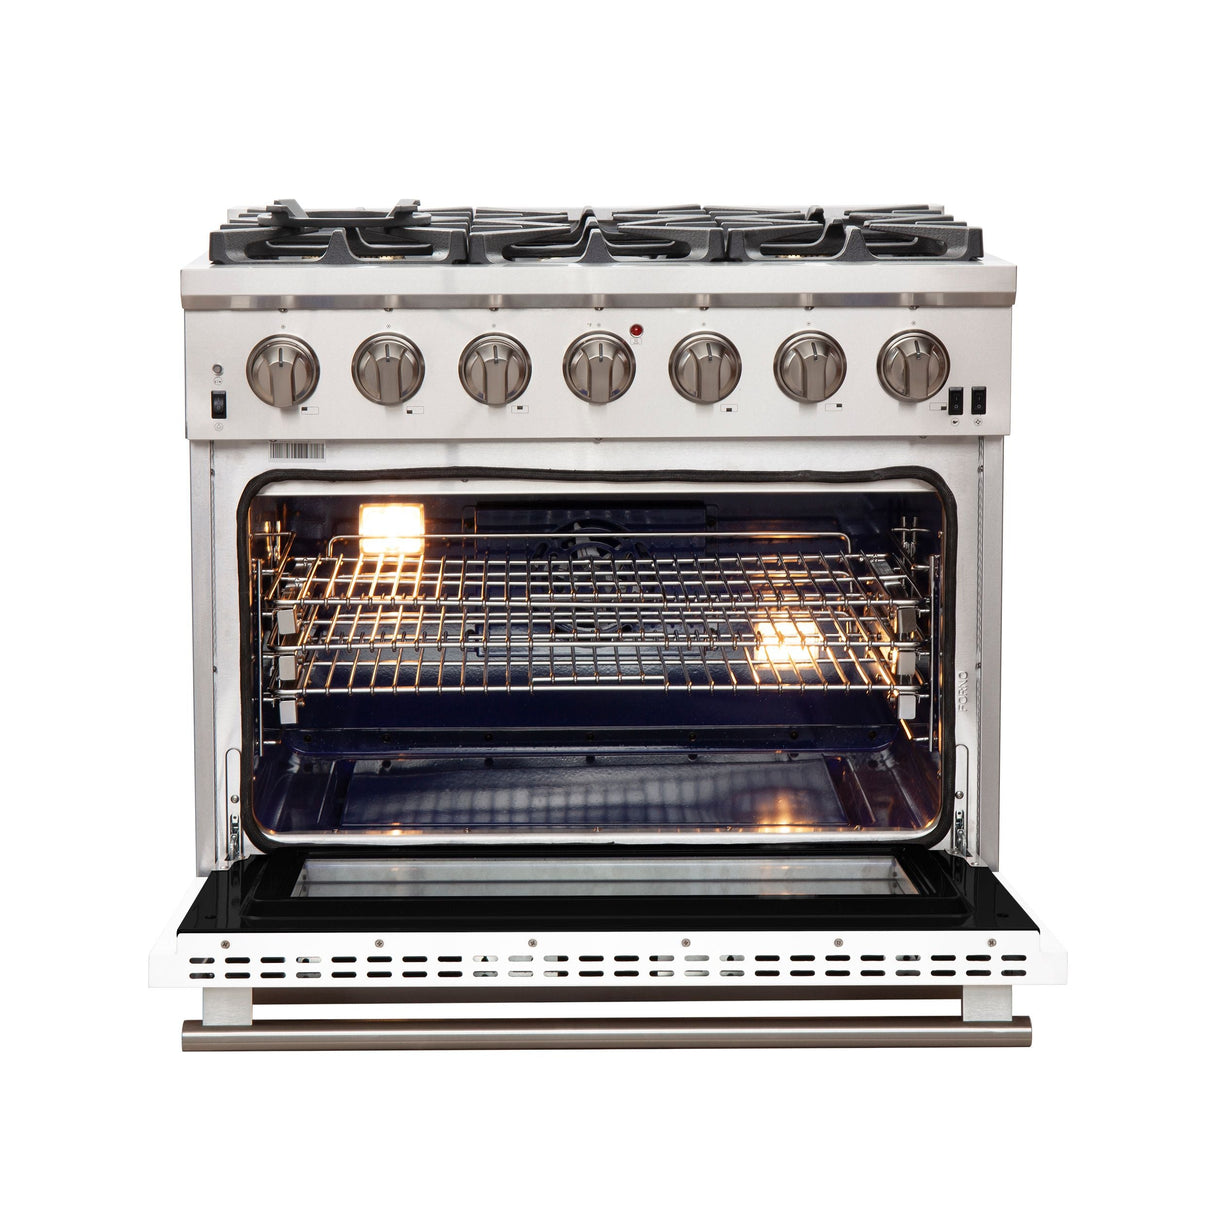 Forno 36-Inch Capriasca Gas Range with 6 Burners and Convection Oven in Stainless Steel with White Door (FFSGS6260-36WHT)